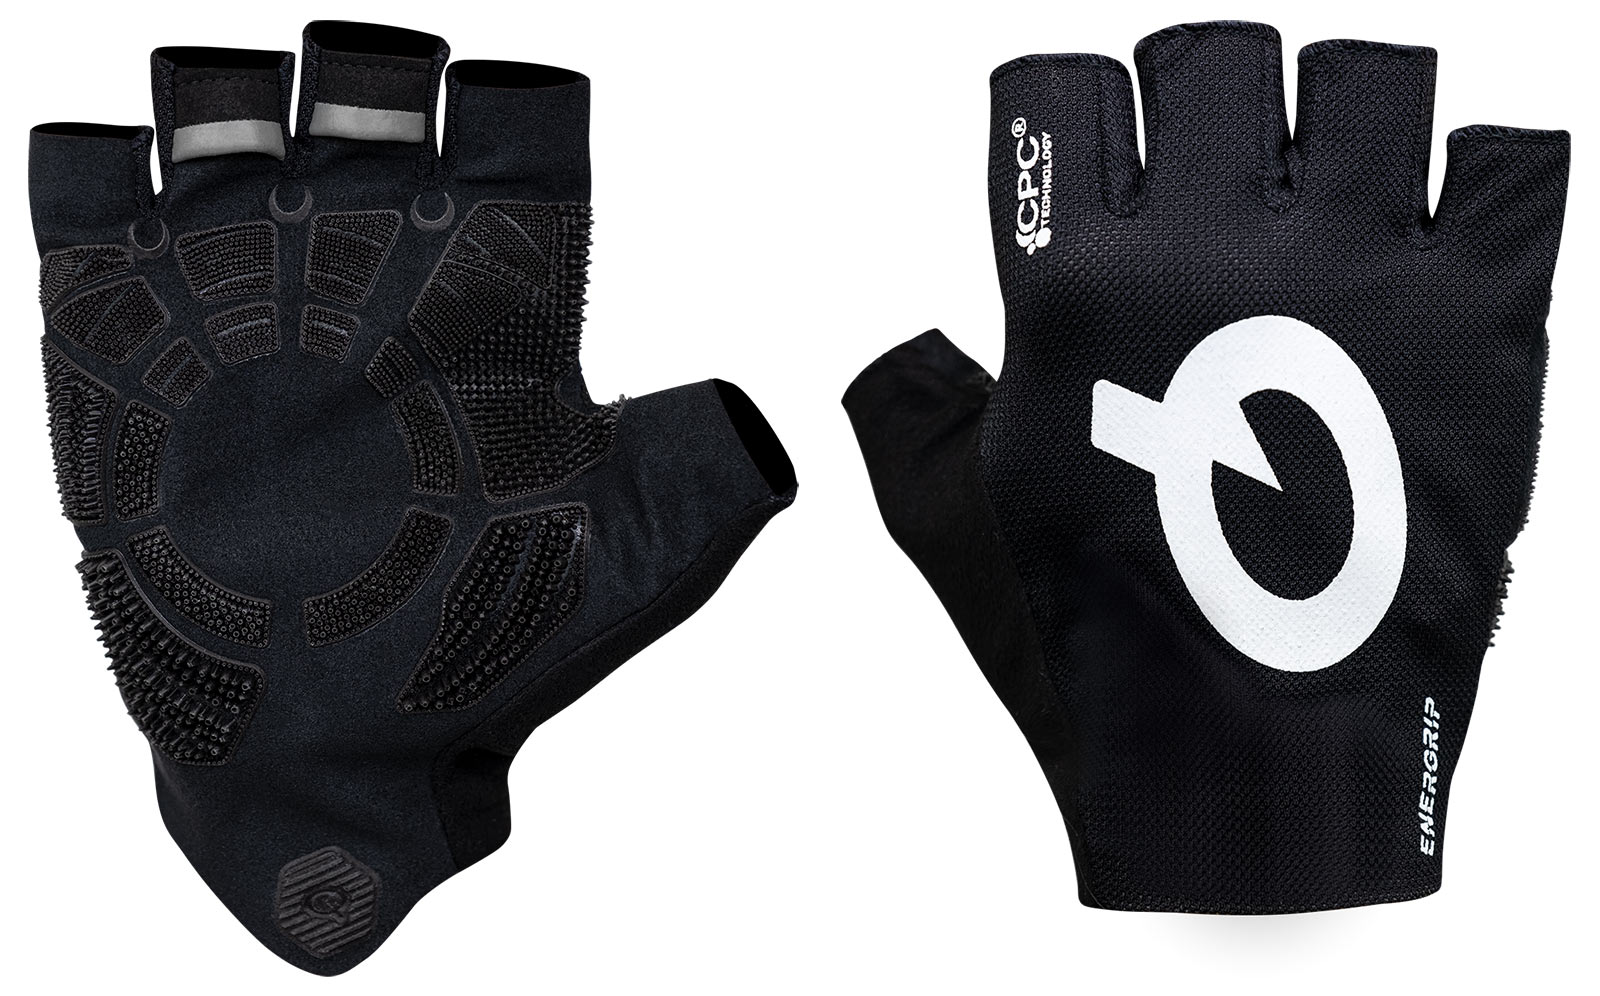 short finger prologo energrip team gloves with CPC vibration damping palm cushioning